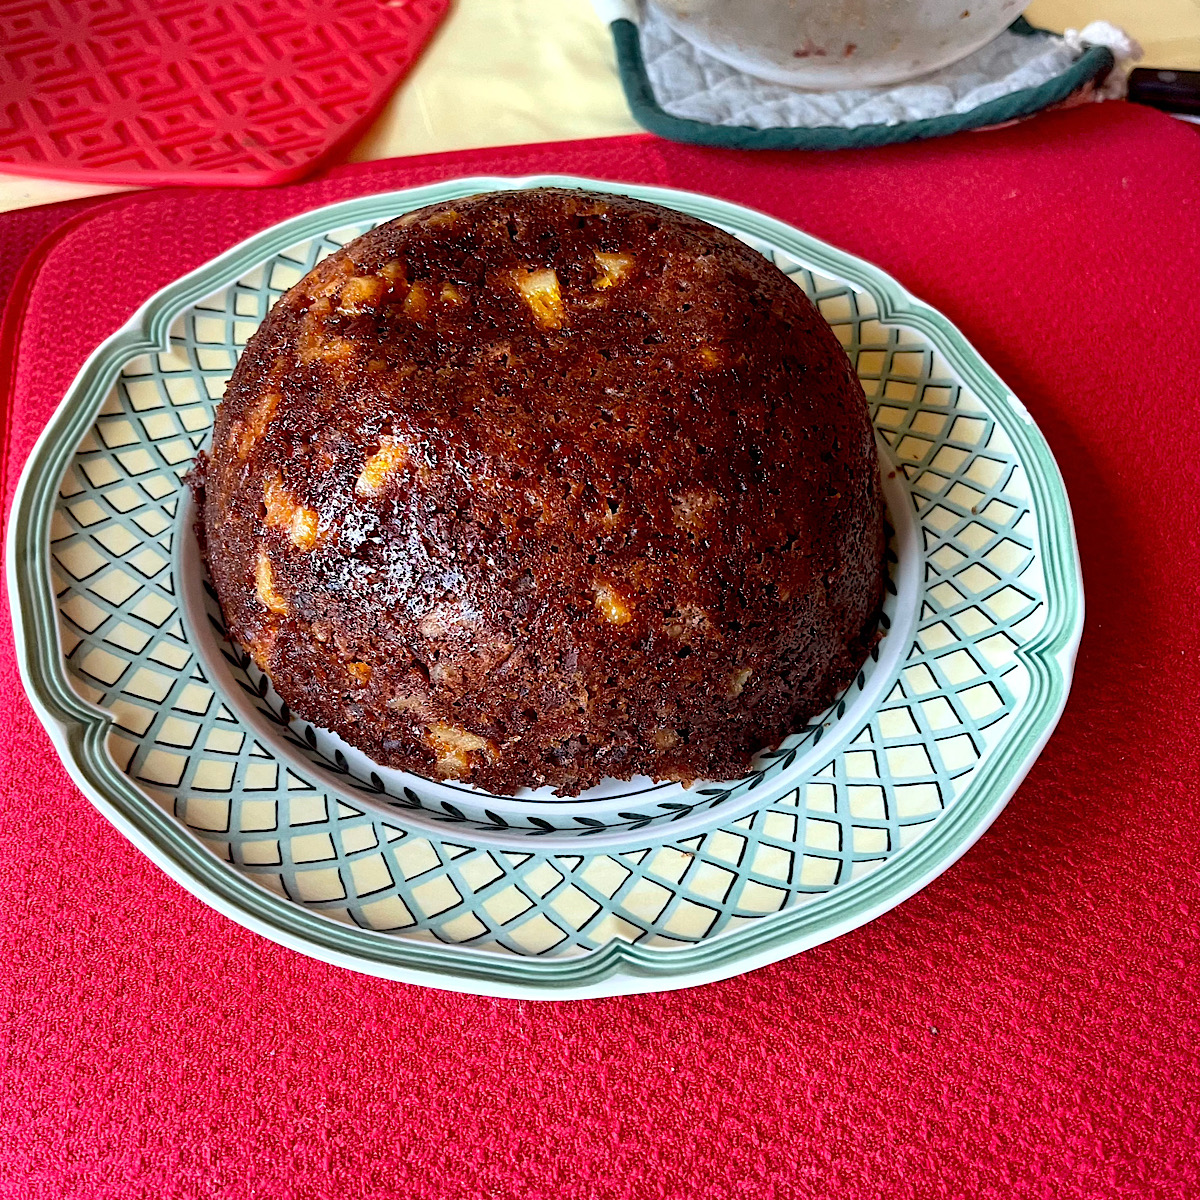 English steamed pudding using bowl as a mold.